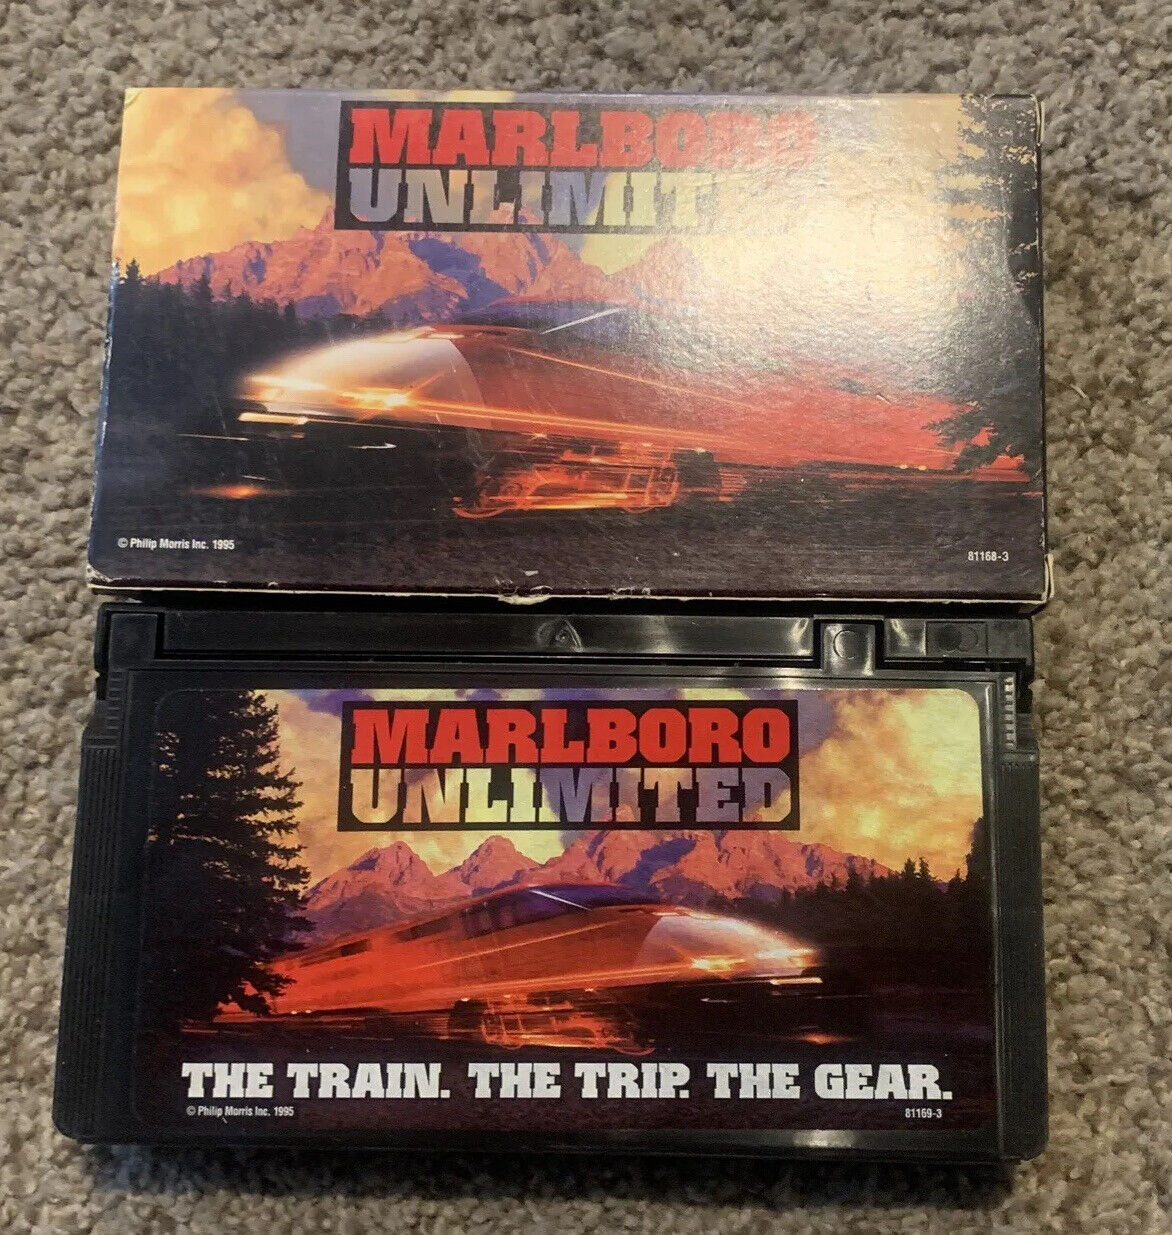 Vintage Marlboro Unlimited - The Train. The Trip. The Gear. vhs. 1995.